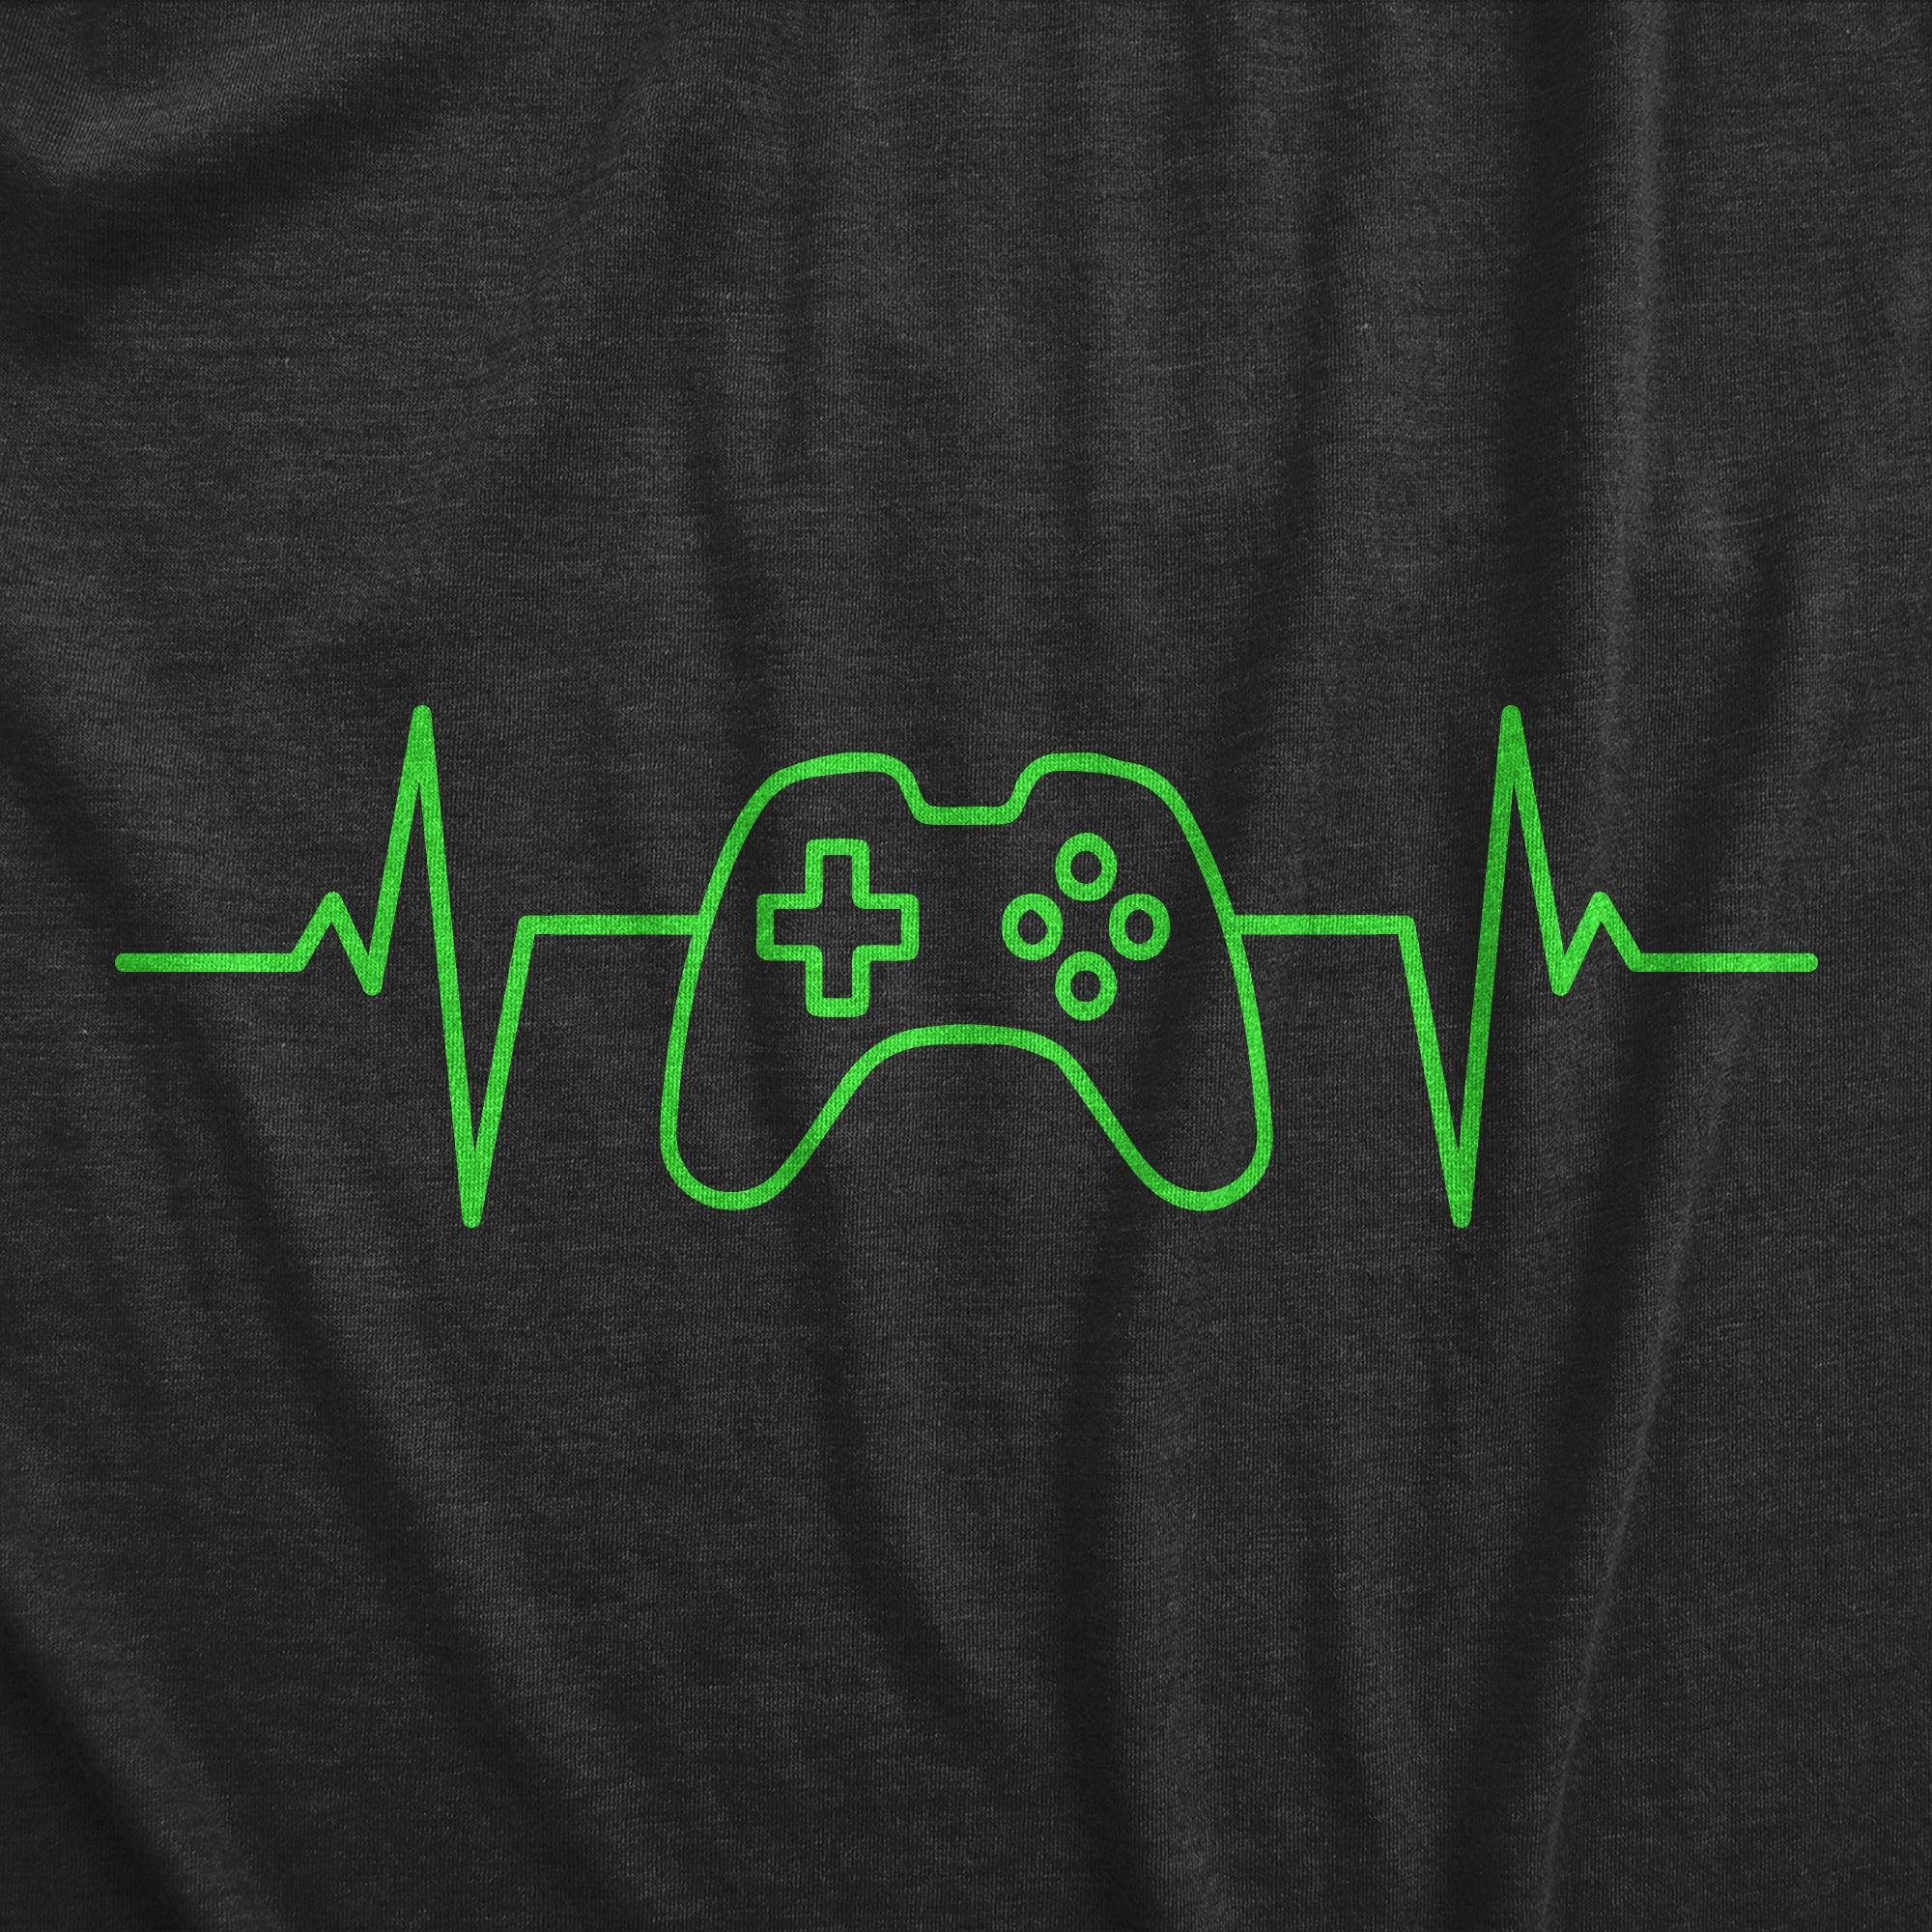 Funny Heather Black Video Game Heart Beat Mens T Shirt Nerdy Video Games Tee